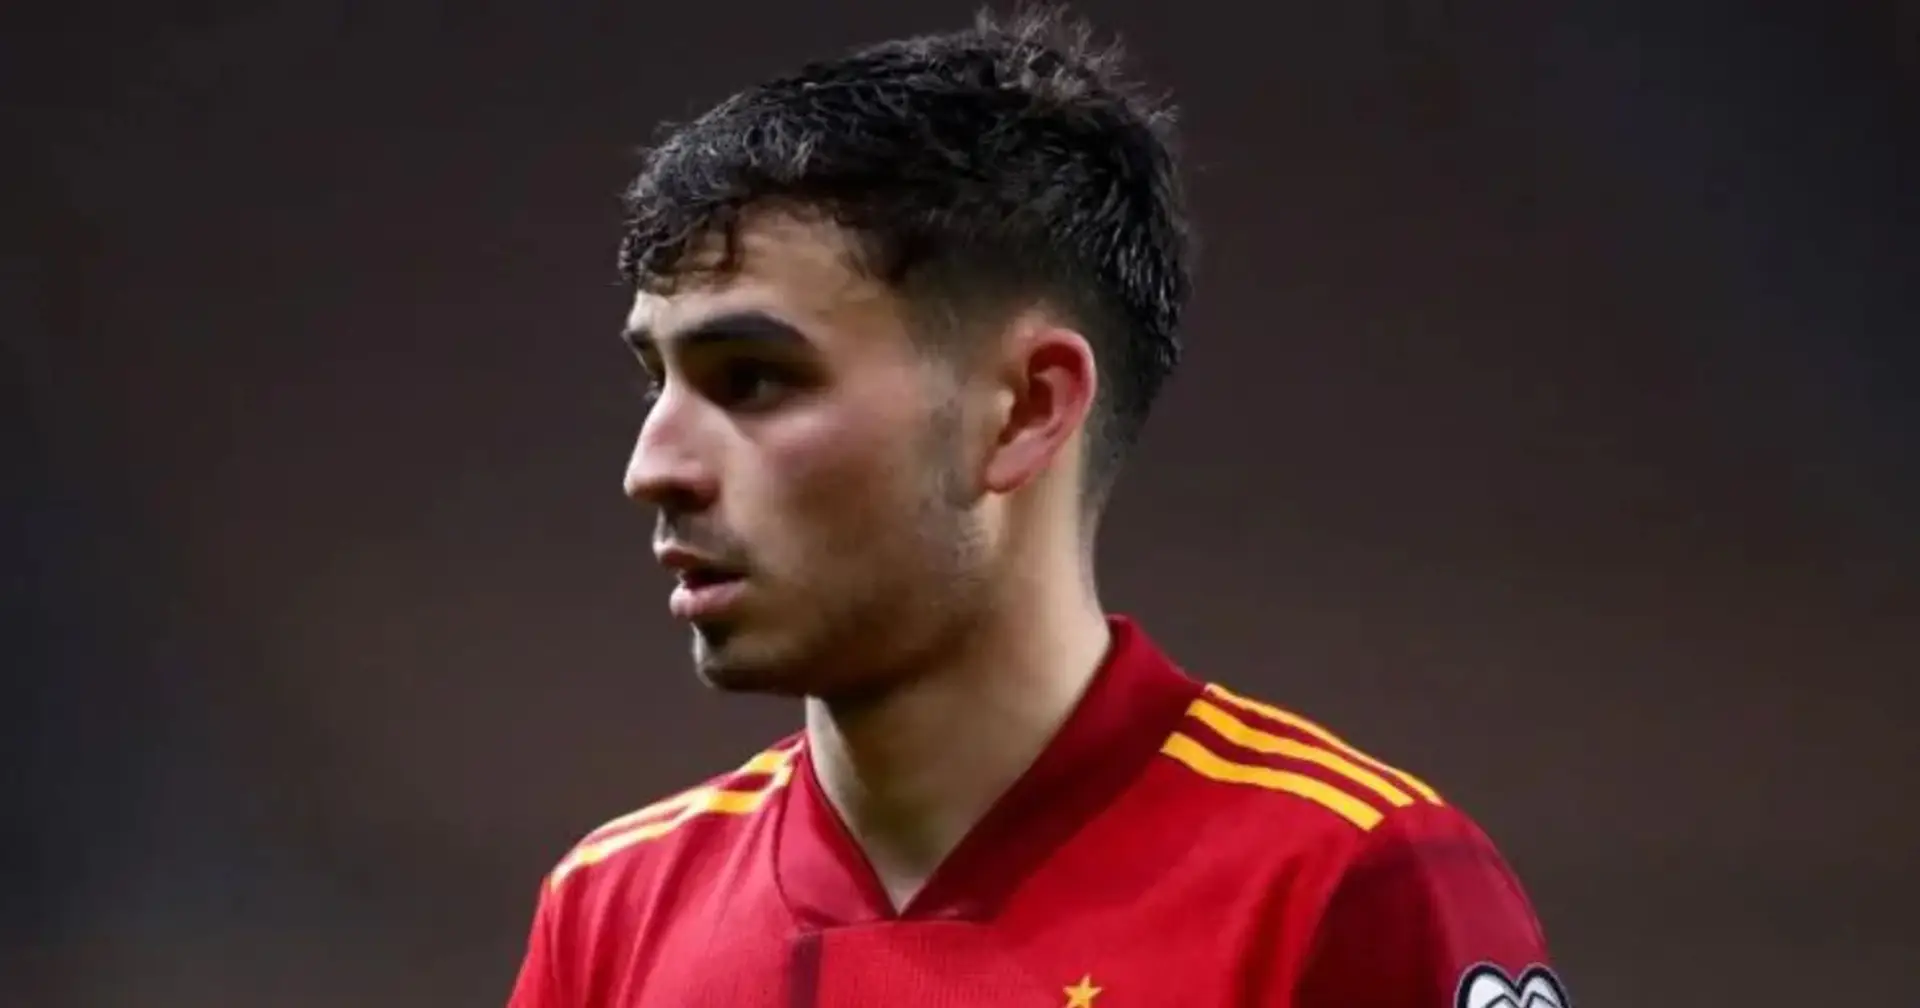 Pedri breaks 41-year-old record as he's set to start for Spain at Euro 2020